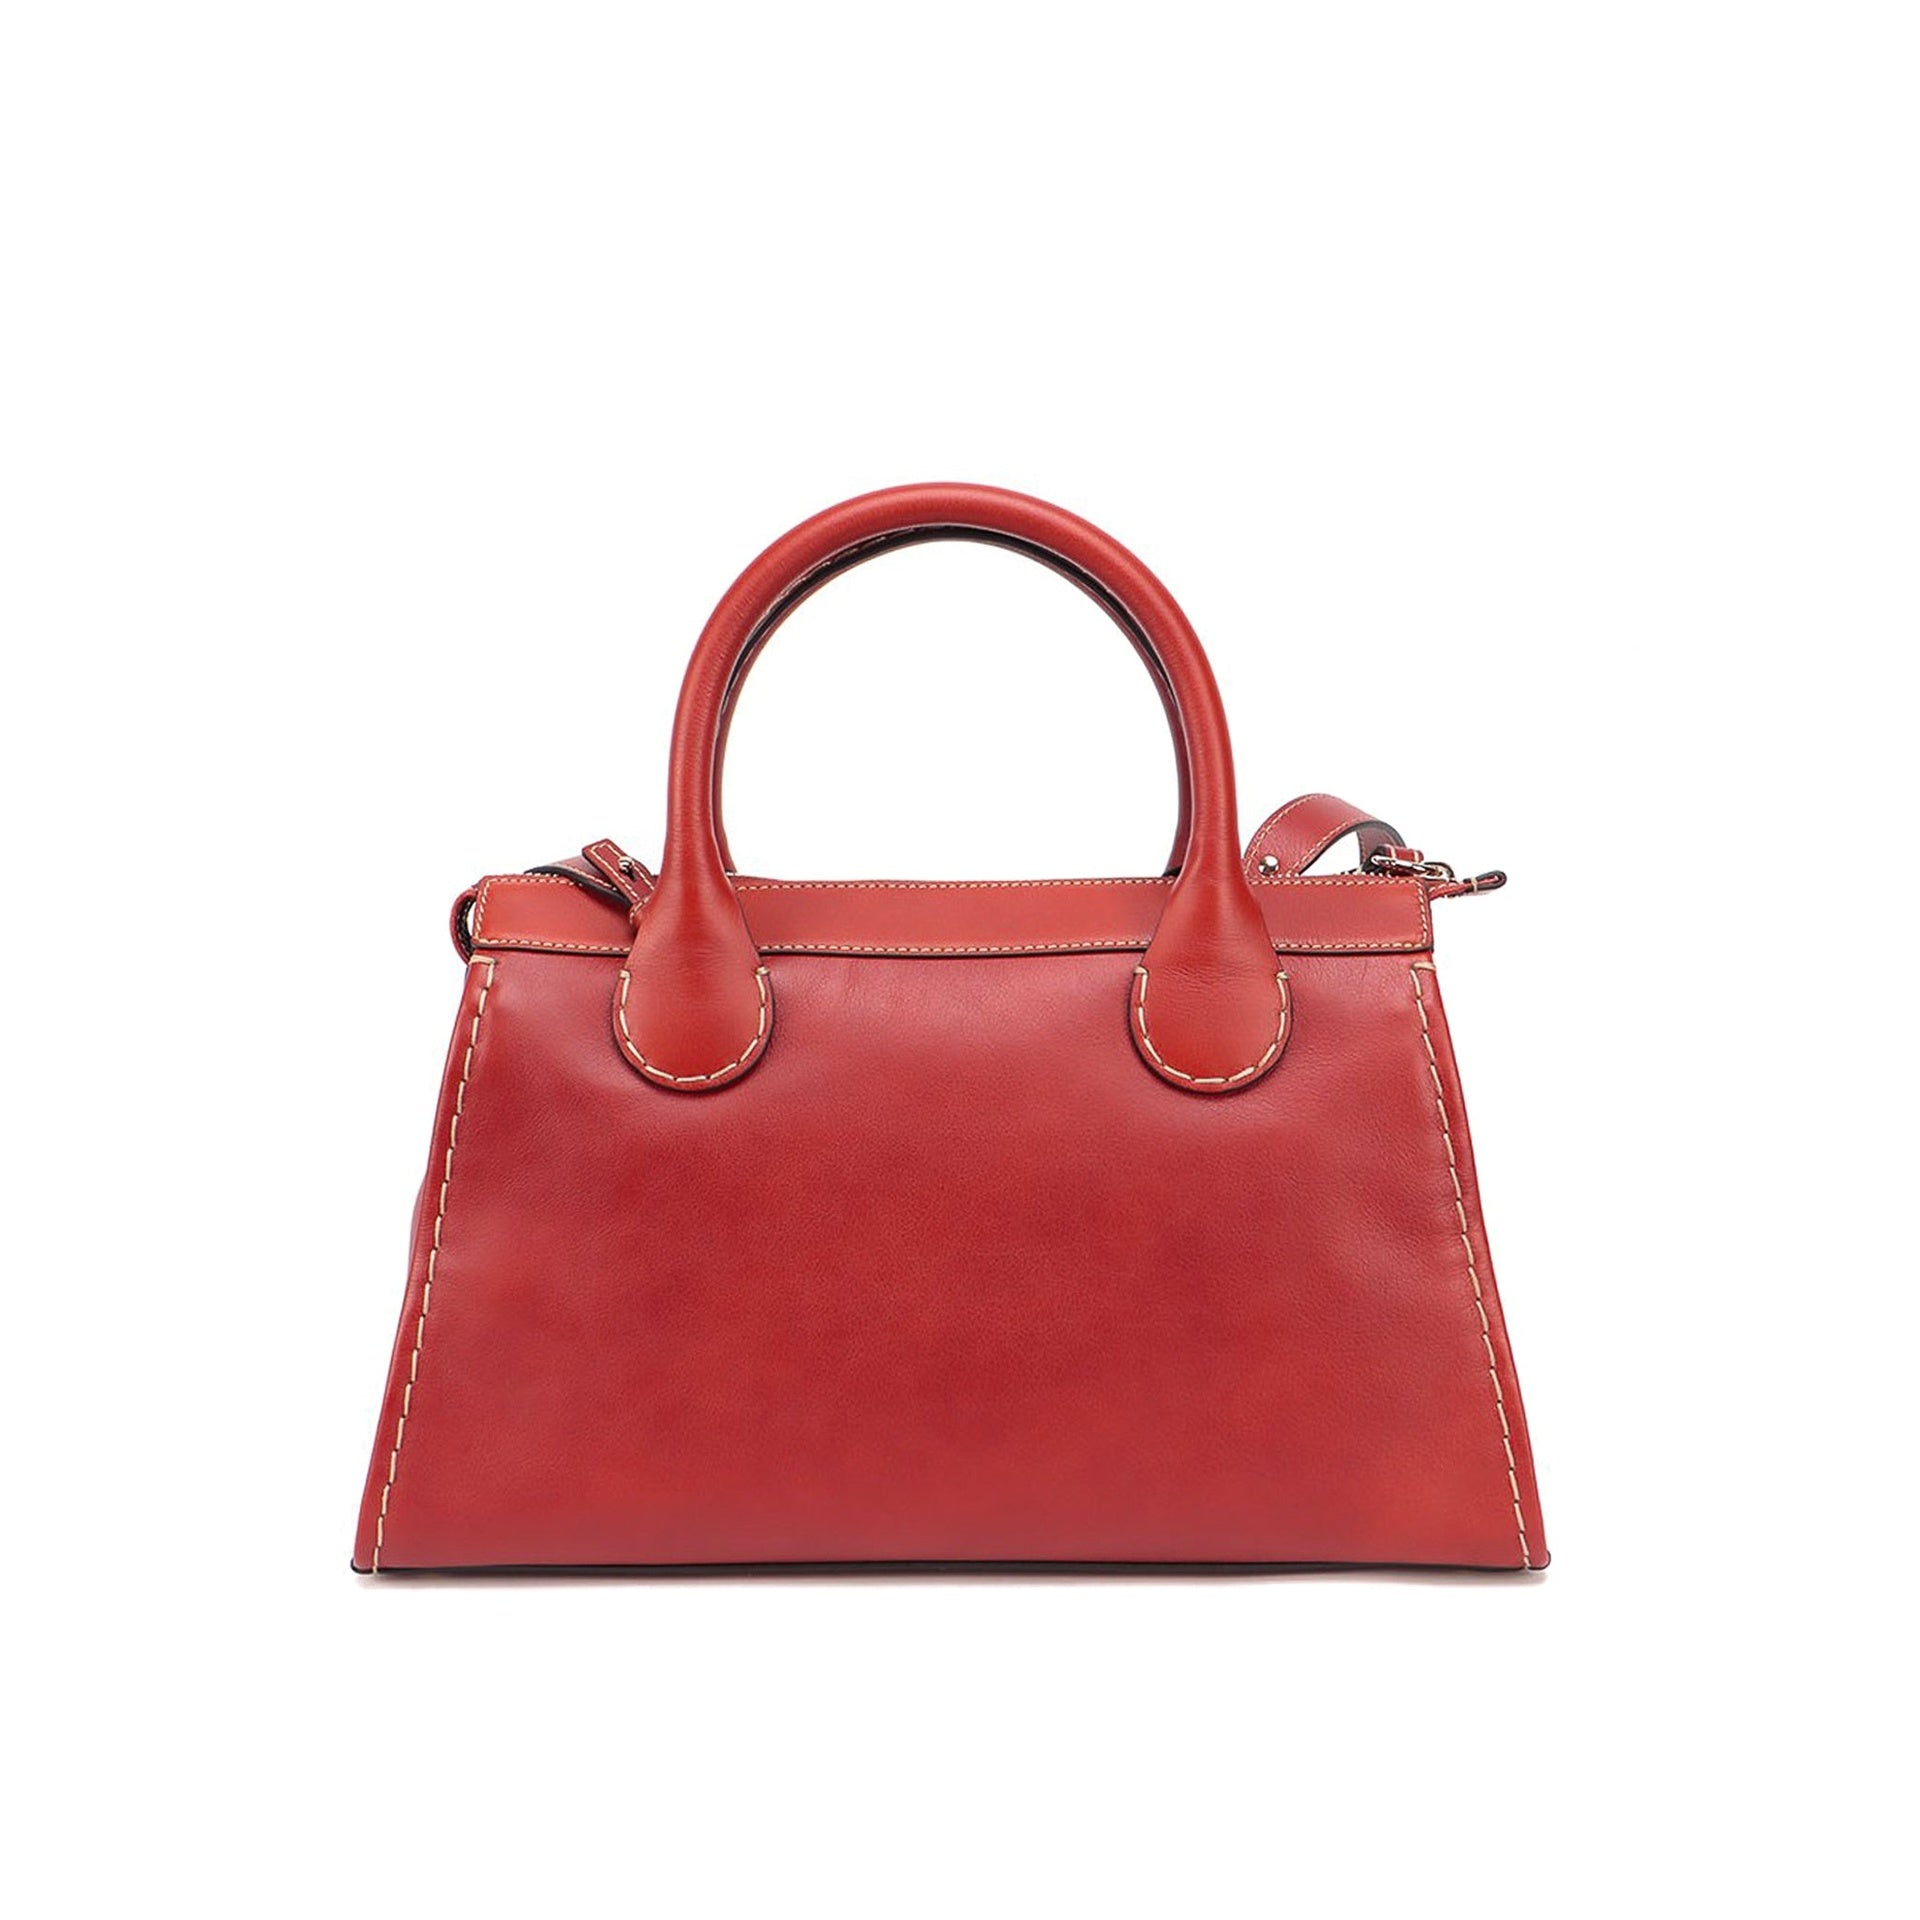 CHLOE-OUTLET-SALE-Chloe-Edith-Leather-Tote-Bag-Taschen-BROWN-UNI-ARCHIVE-COLLECTION-3.jpg